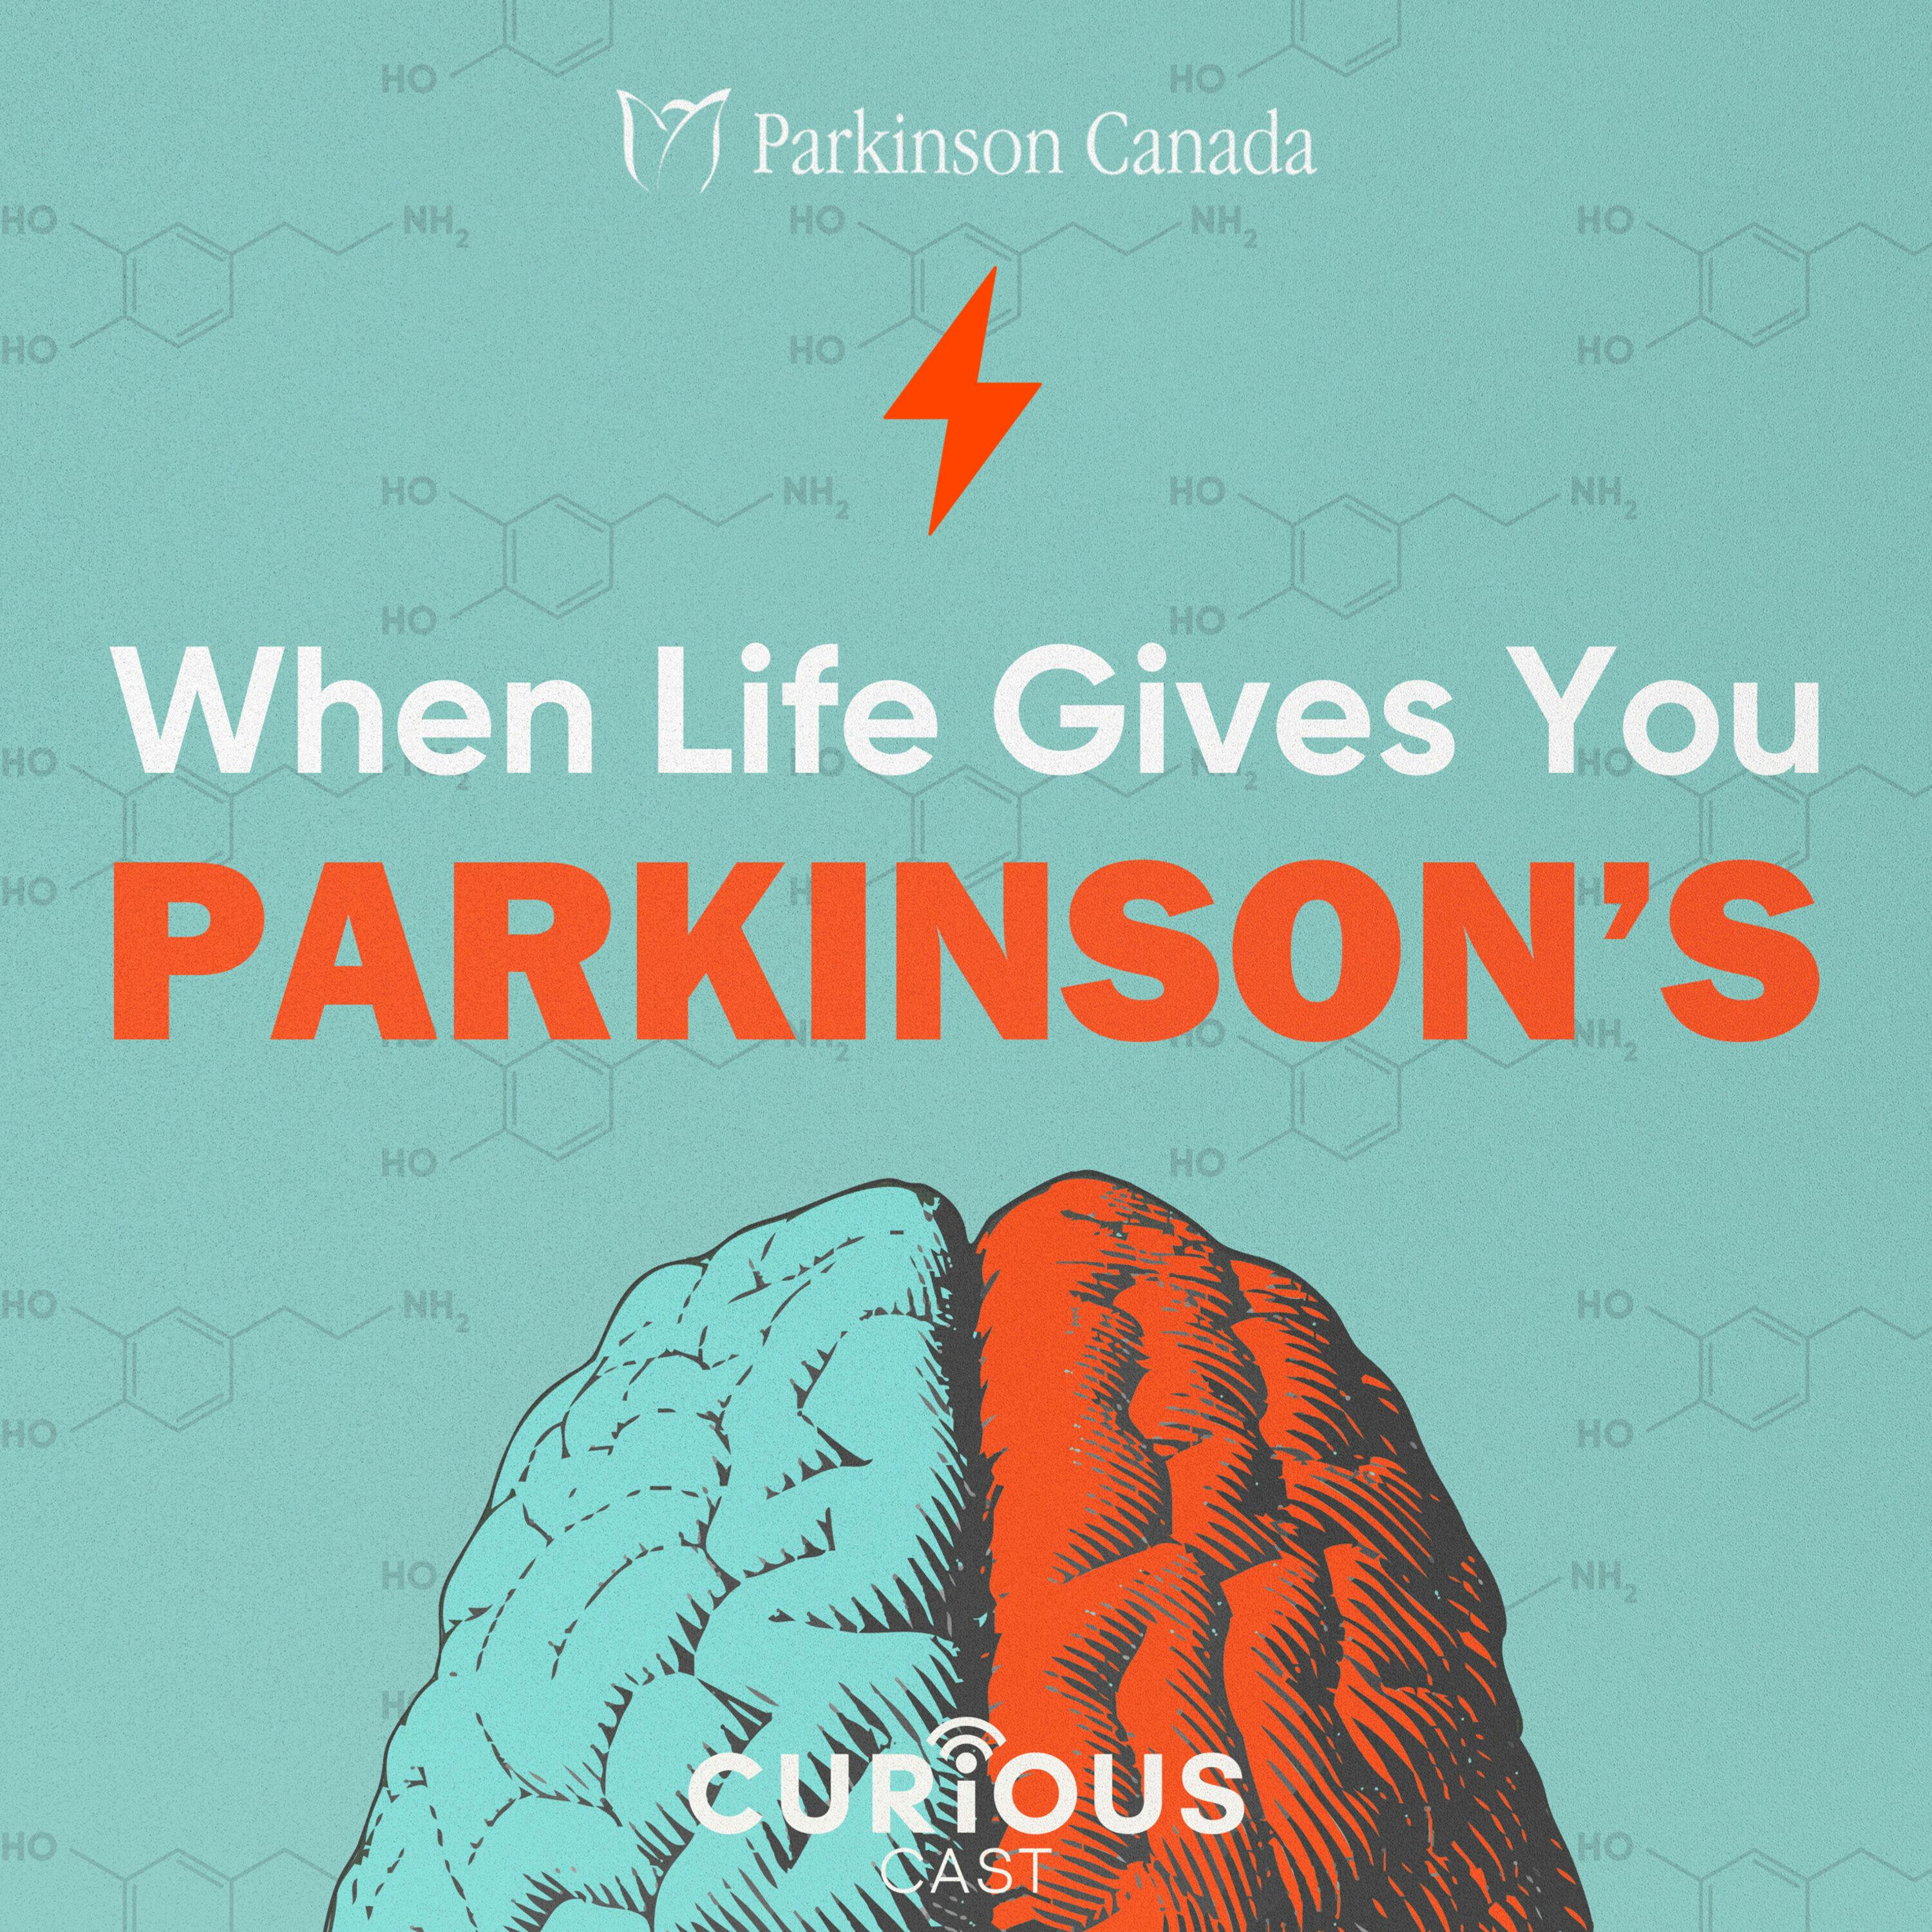 Down Under | A Spark, A Warrior, and World Parkinson’s Day